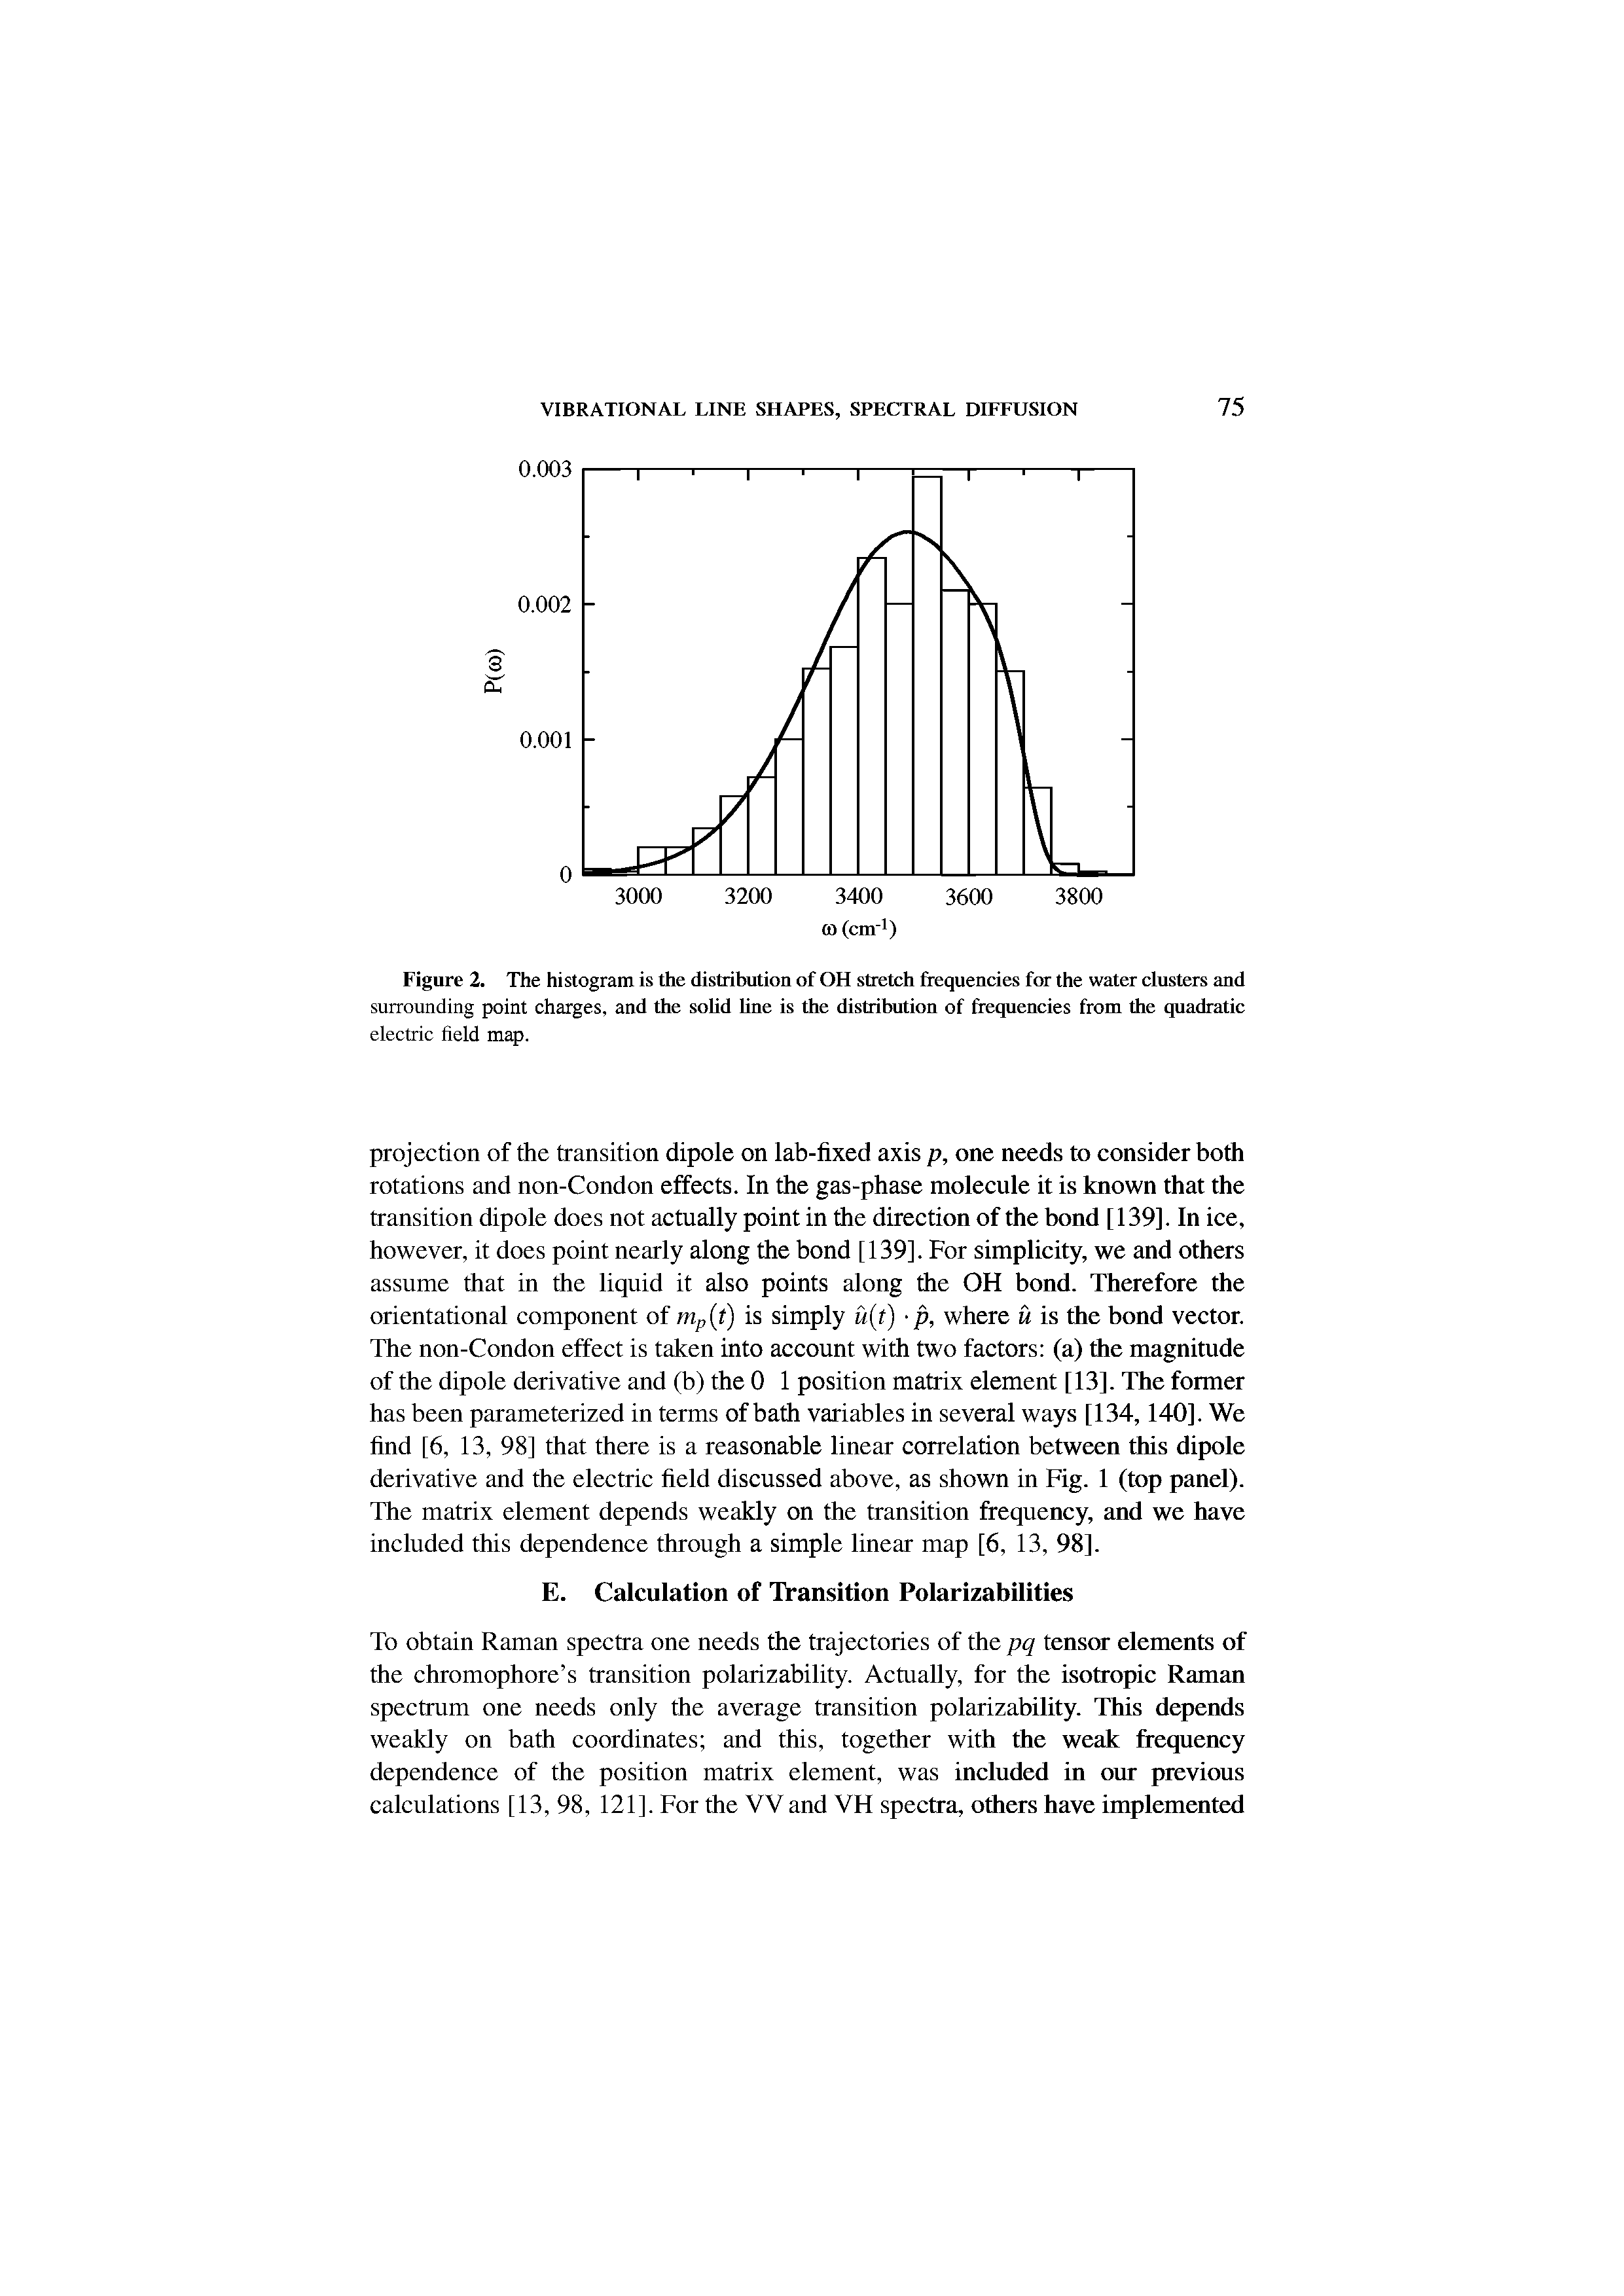 Figure 2. The histogram is the distribution of OH stretch frequencies for the water clusters and surrounding point charges, and the solid line is the distribution of frequencies from the quadratic electric field map.